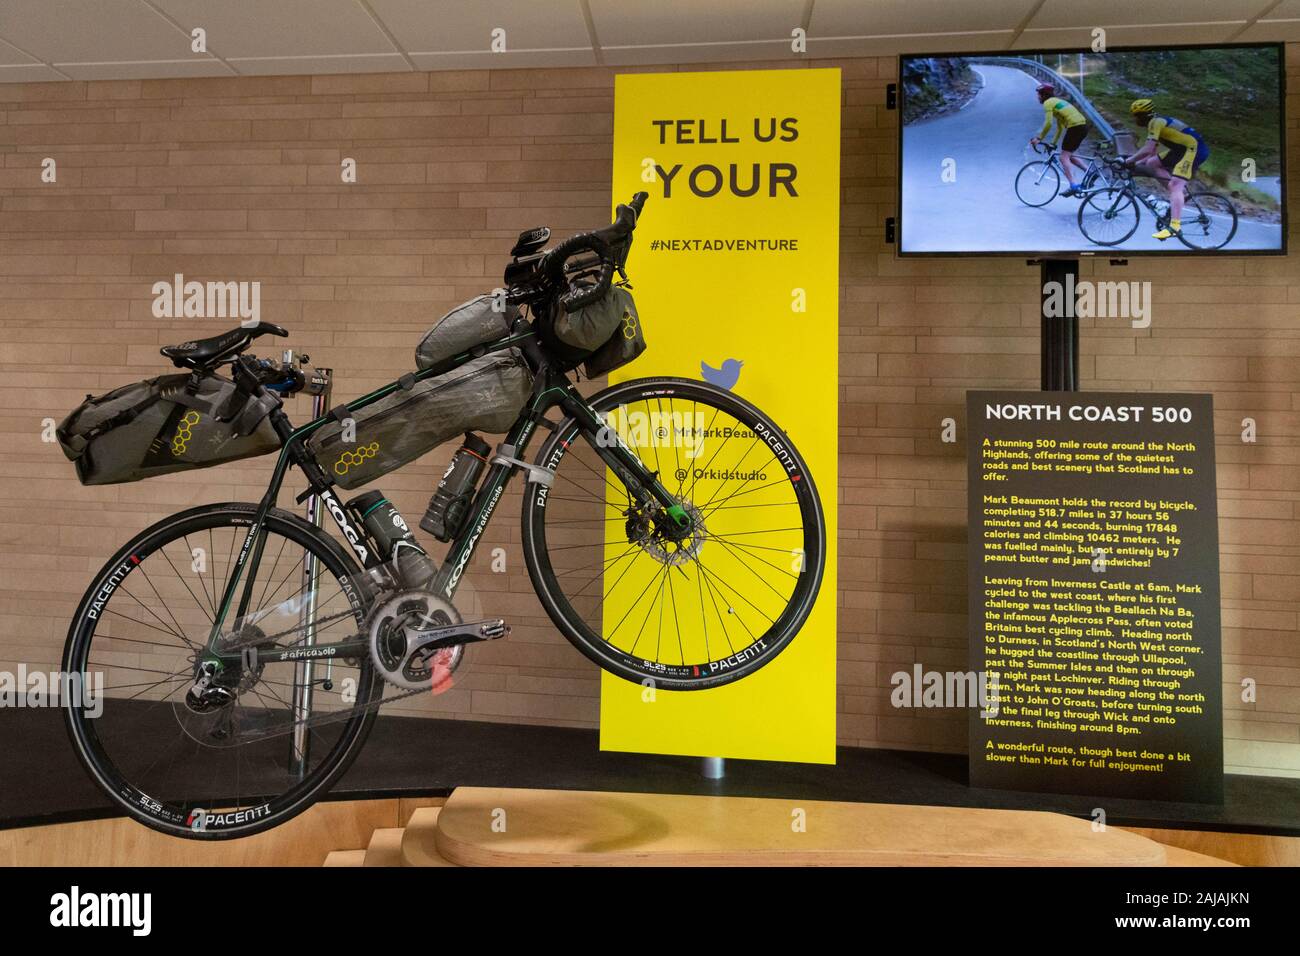 Bike ridden by Mark Beaumont during his record breaking cycle of the North Coast 500 and the Africa Solo challenge on display at Edinburgh Airport ... Stock Photo